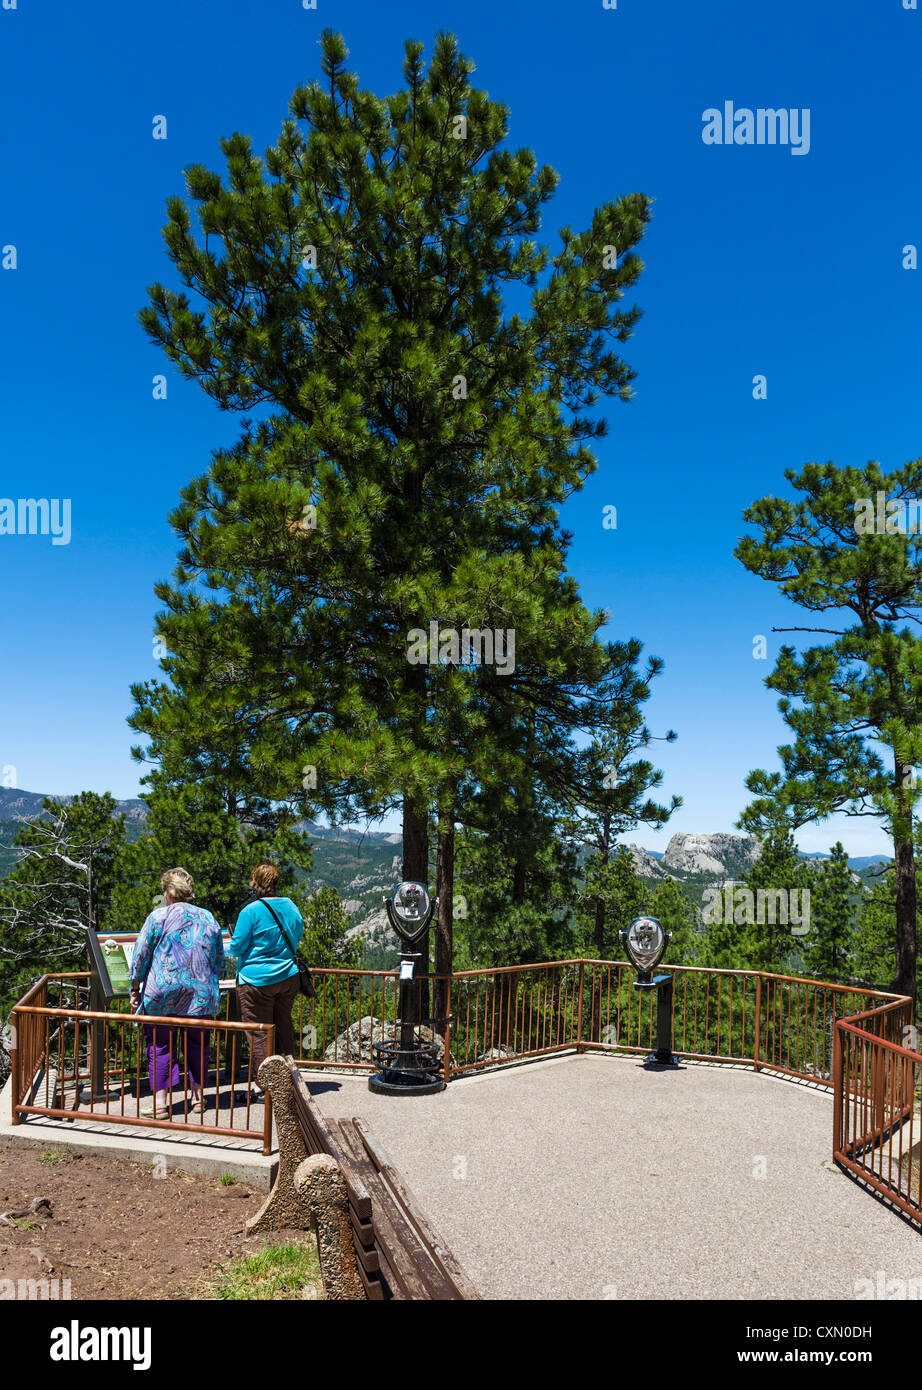 View of Mount Rushmore from Norbeck Overlook, Iron Mountain Road in Black Hills National Forest near Keystone, South Dakota, USA Stock Photo